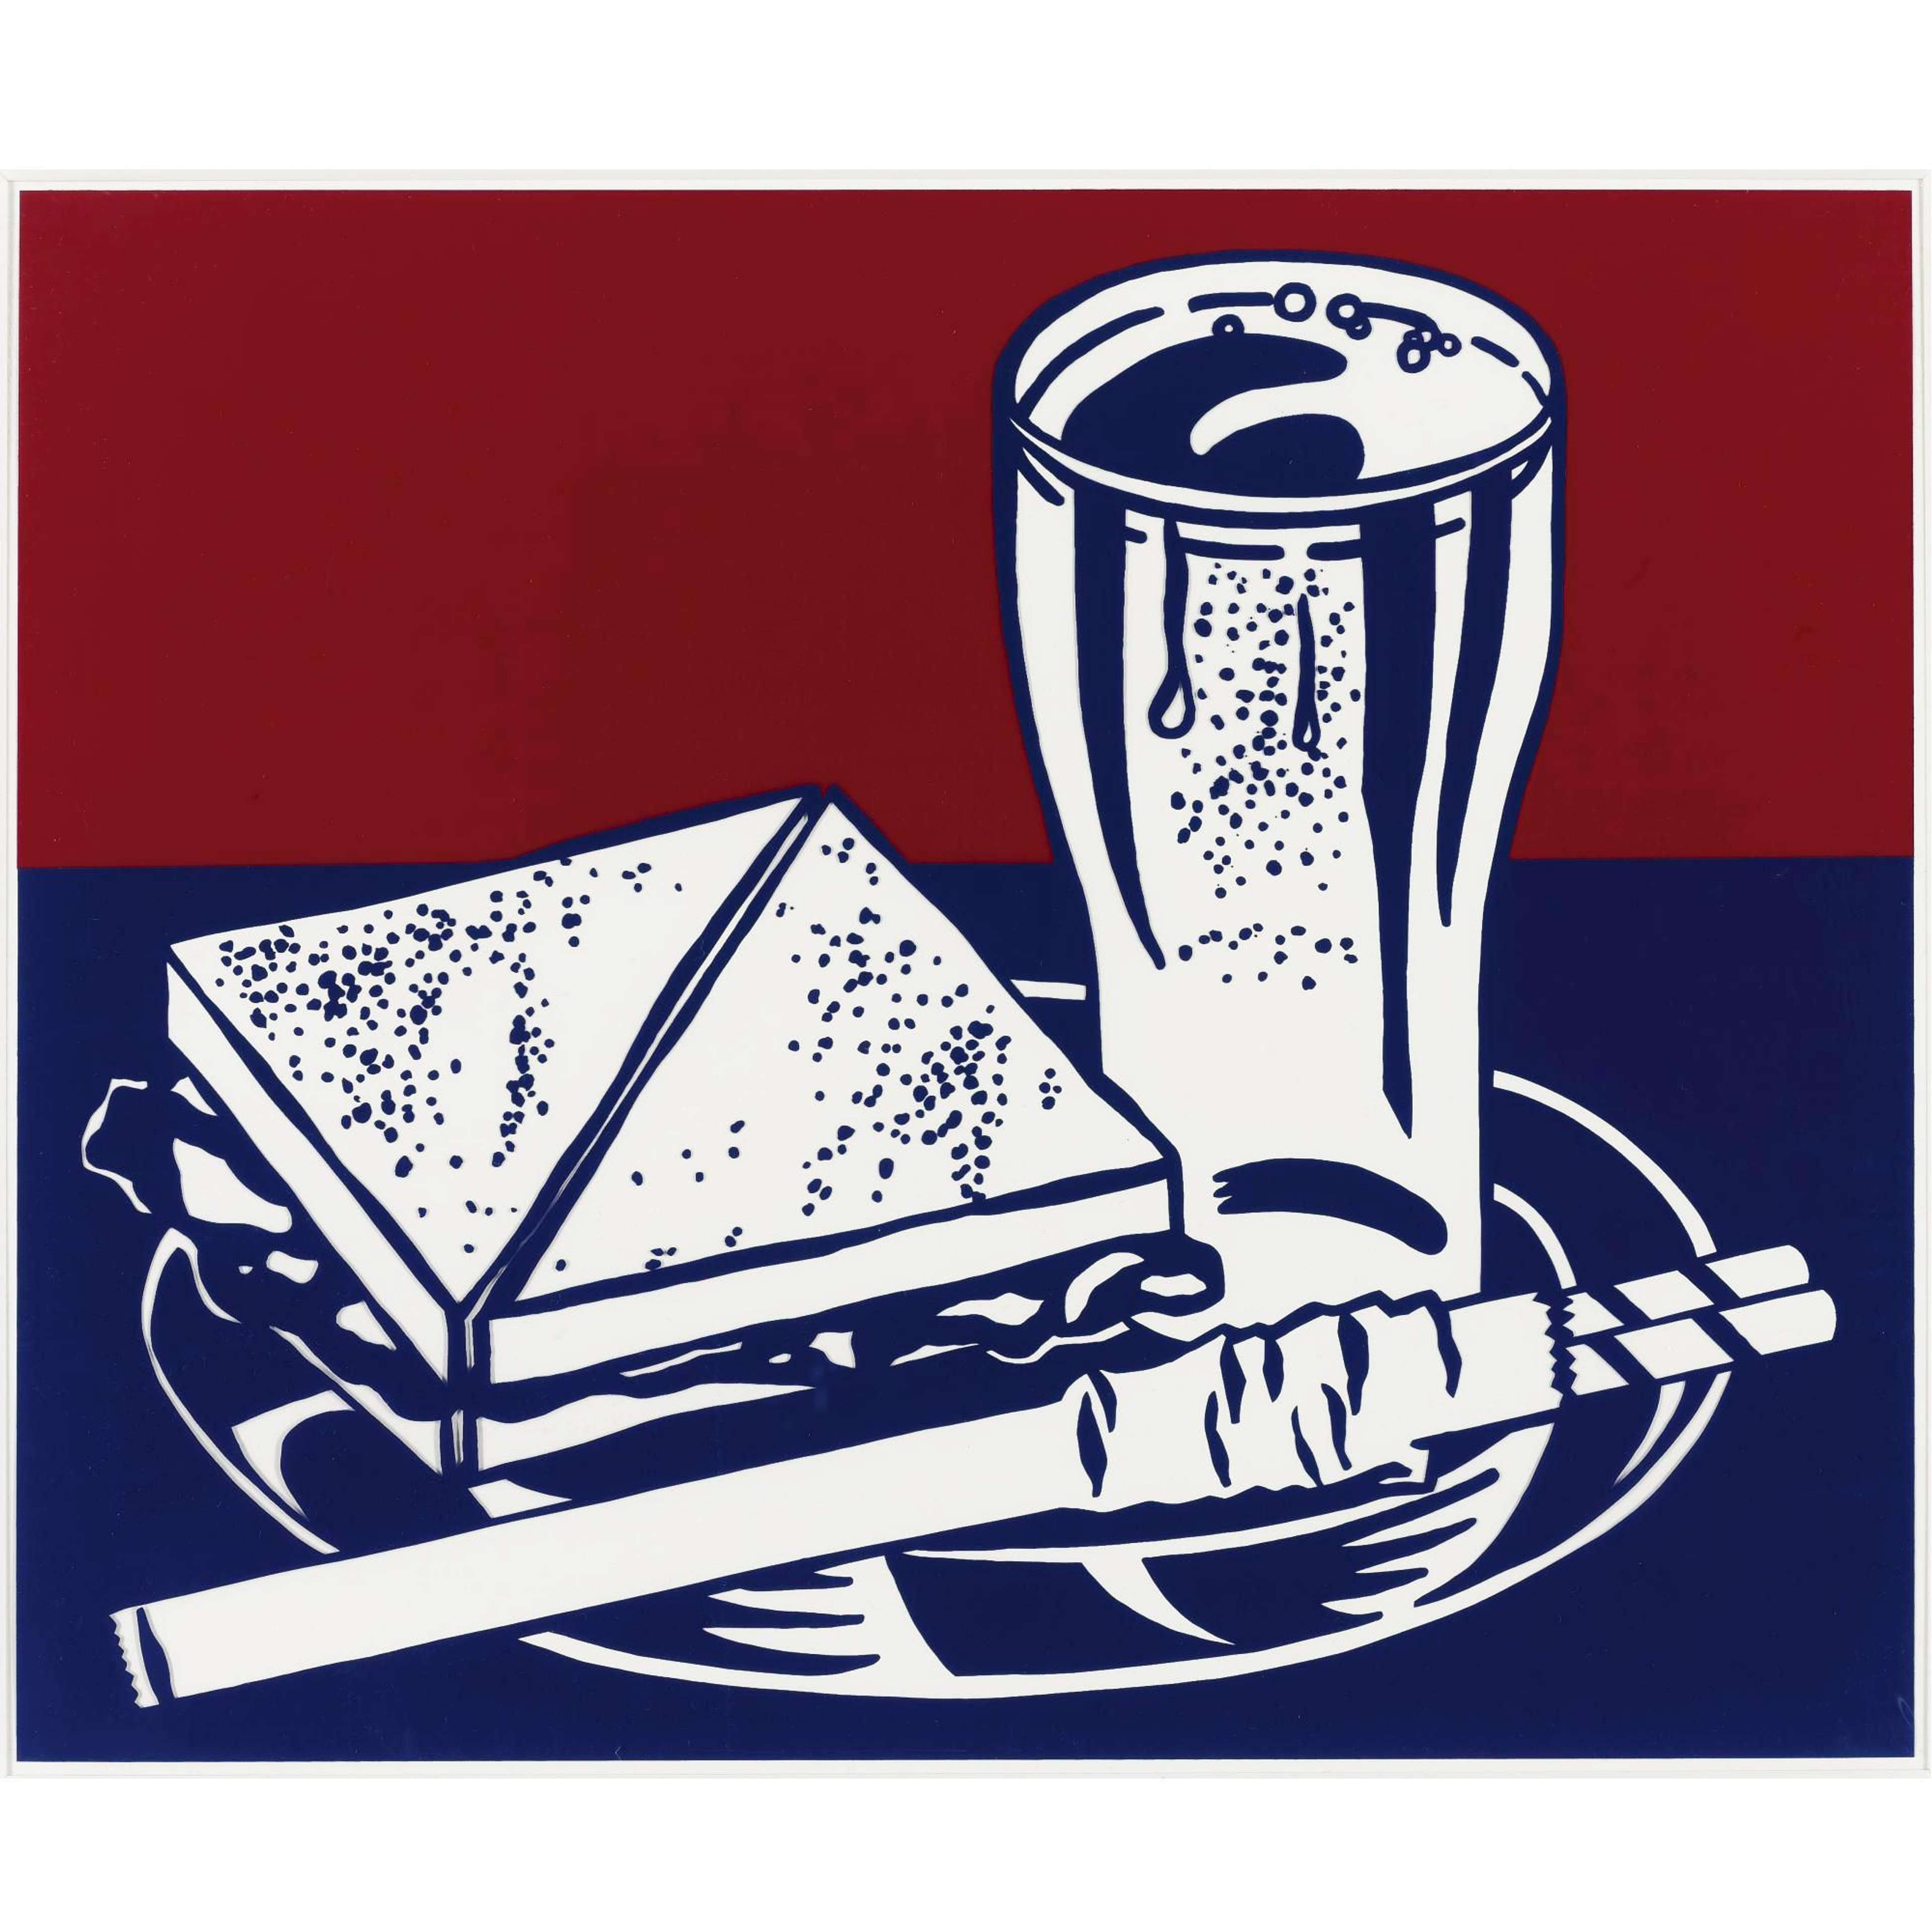 This print by Roy Lichtenstein shows a sandwich cut into triangles, a glass of soda and a straw. The colour palette is composed of red, white and blue.